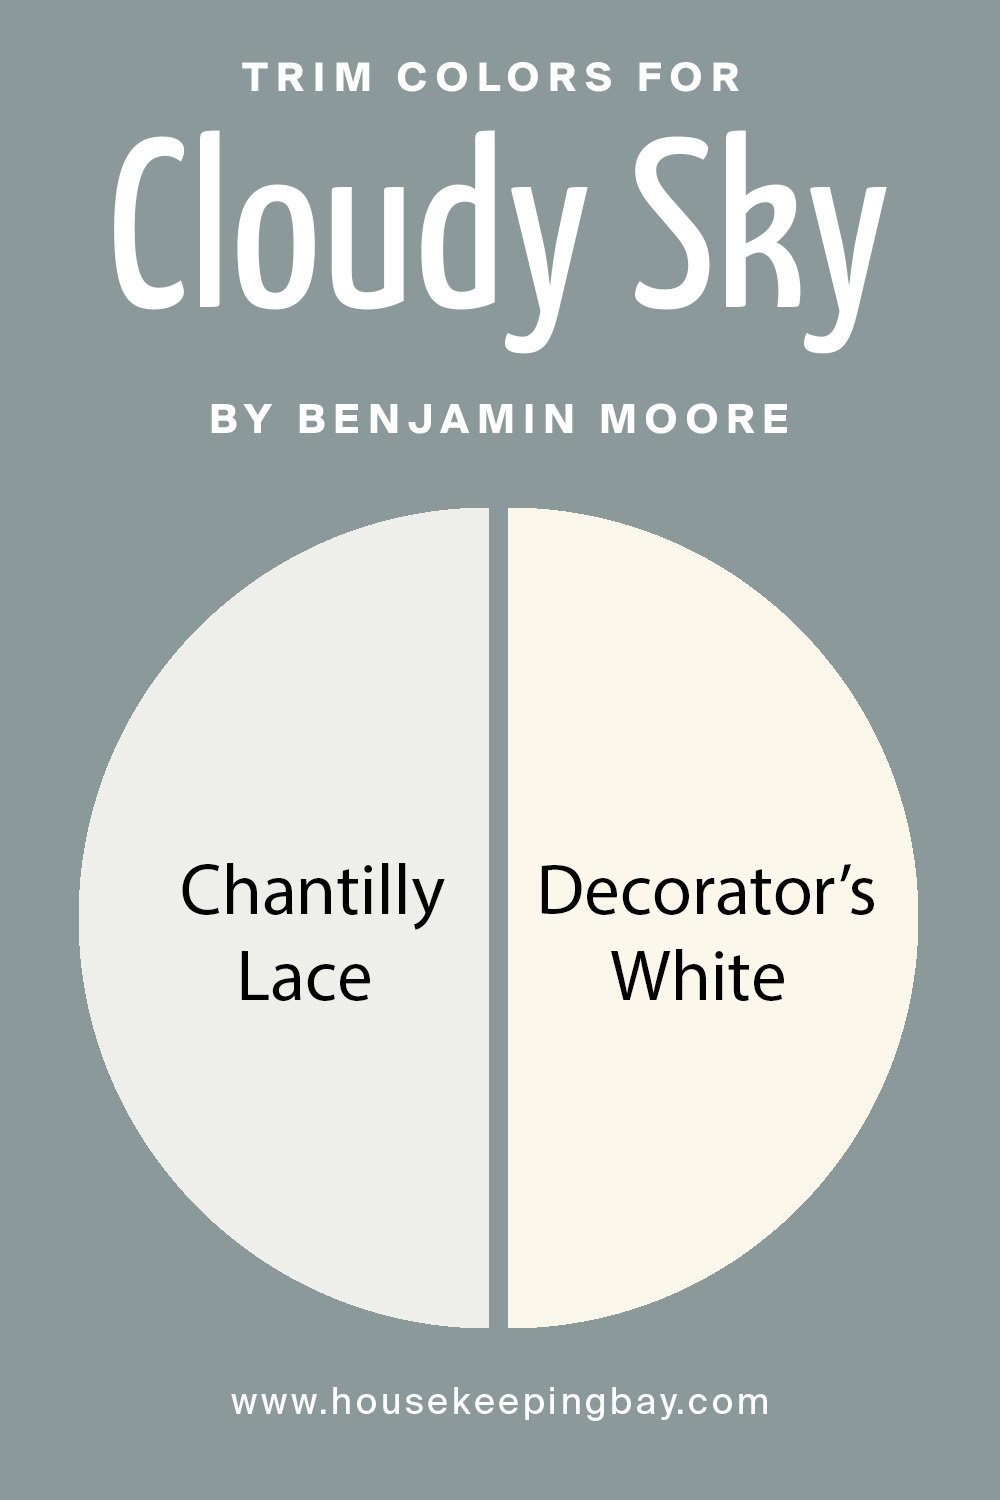 trim colors for cloudy sky 2122-30 by benjamin moore